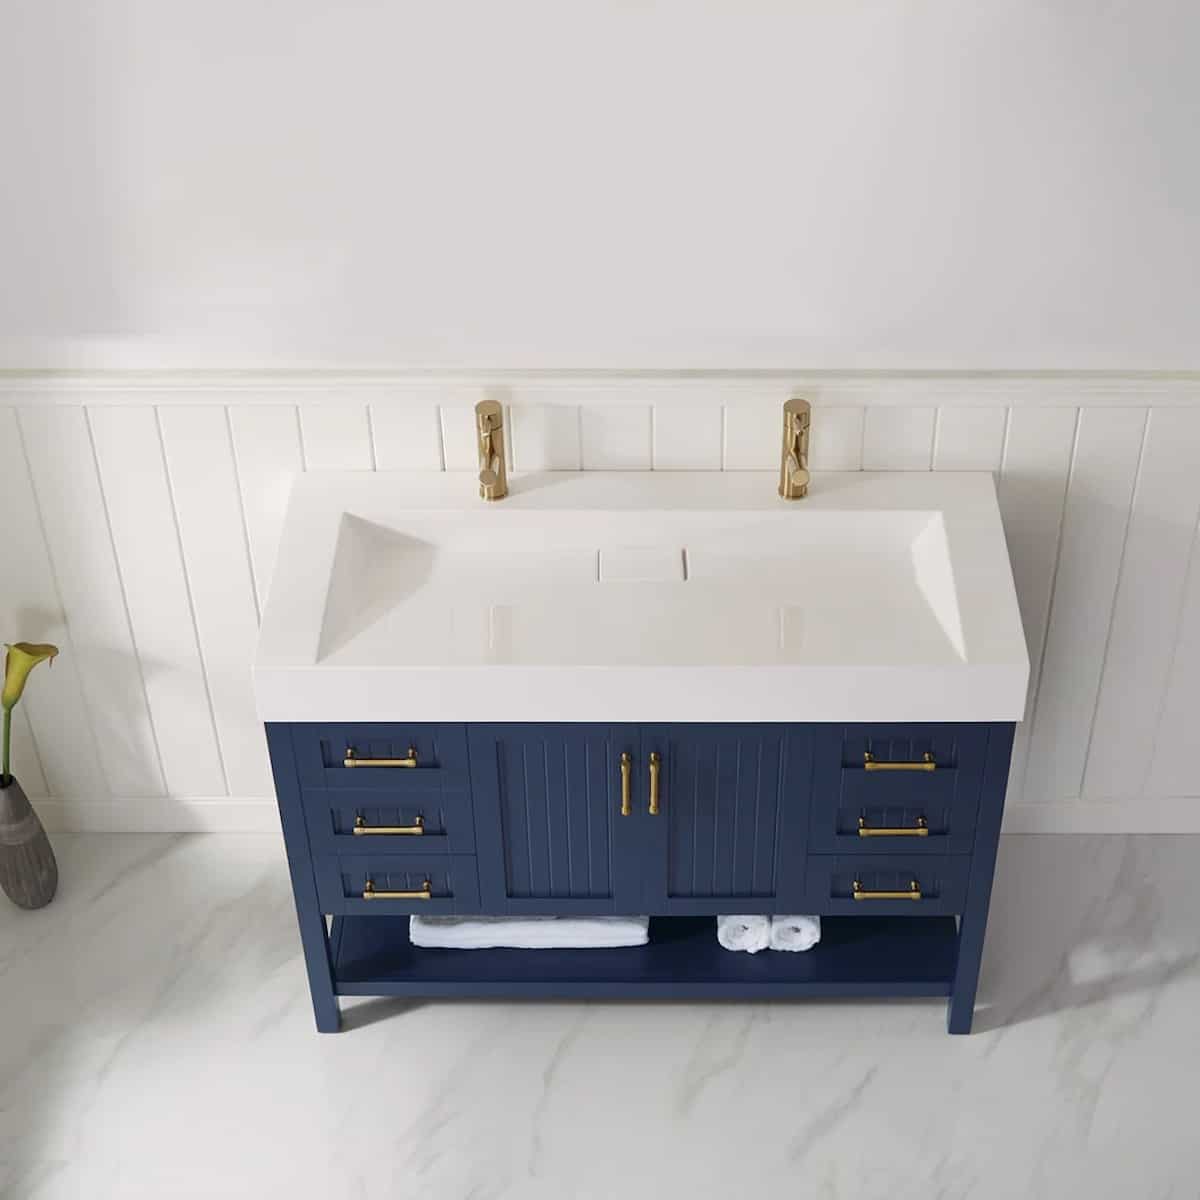 Vinnova Pavia 48 Inch Royal Blue Freestanding Double Vanity with Acrylic Under-Mount Sink Without Mirror Sink 755048-RB-WH-NM